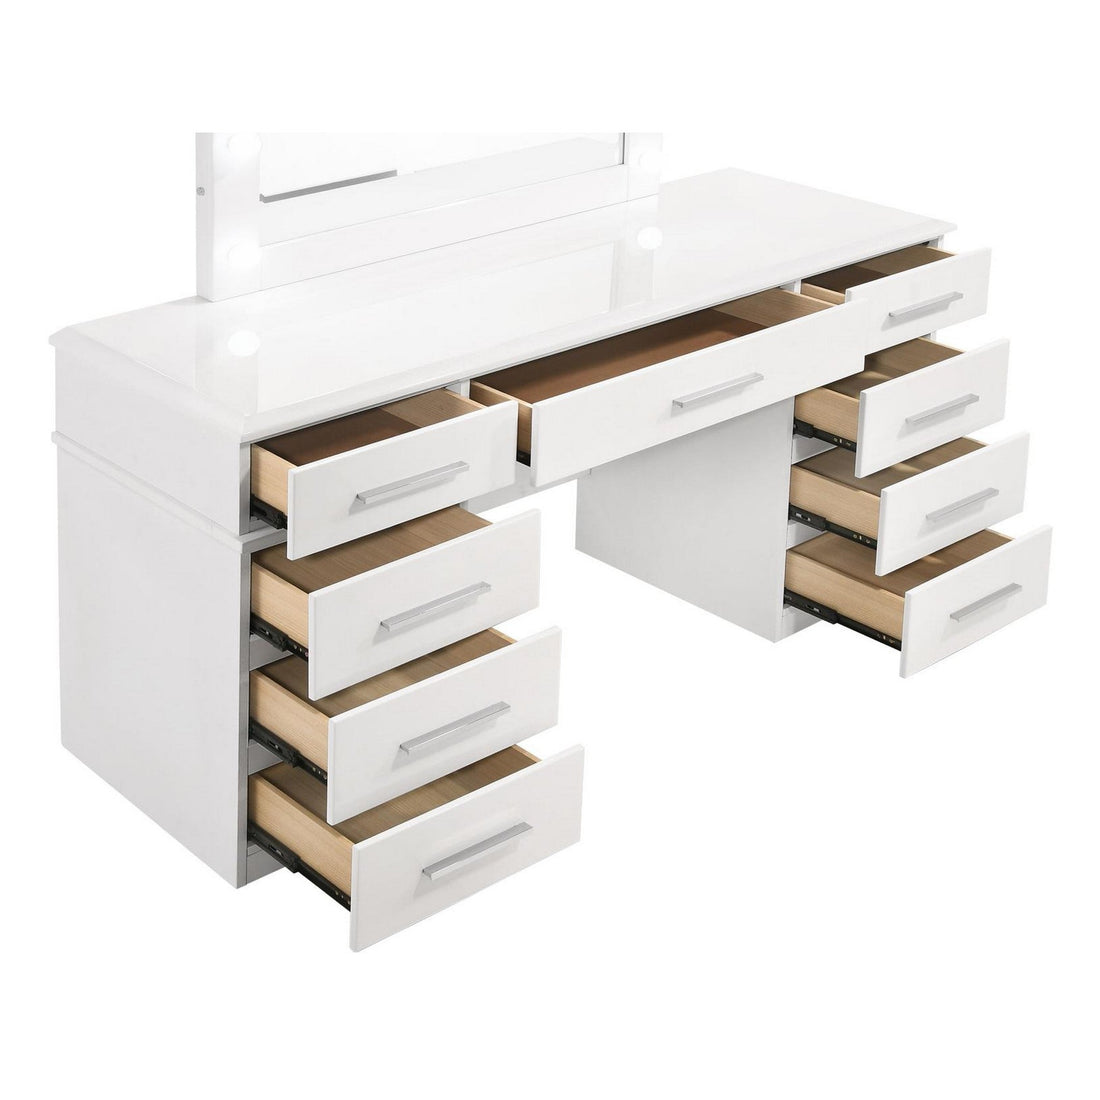 Felicity 9-drawer Vanity Desk with Lighted Mirror Glossy White 203507